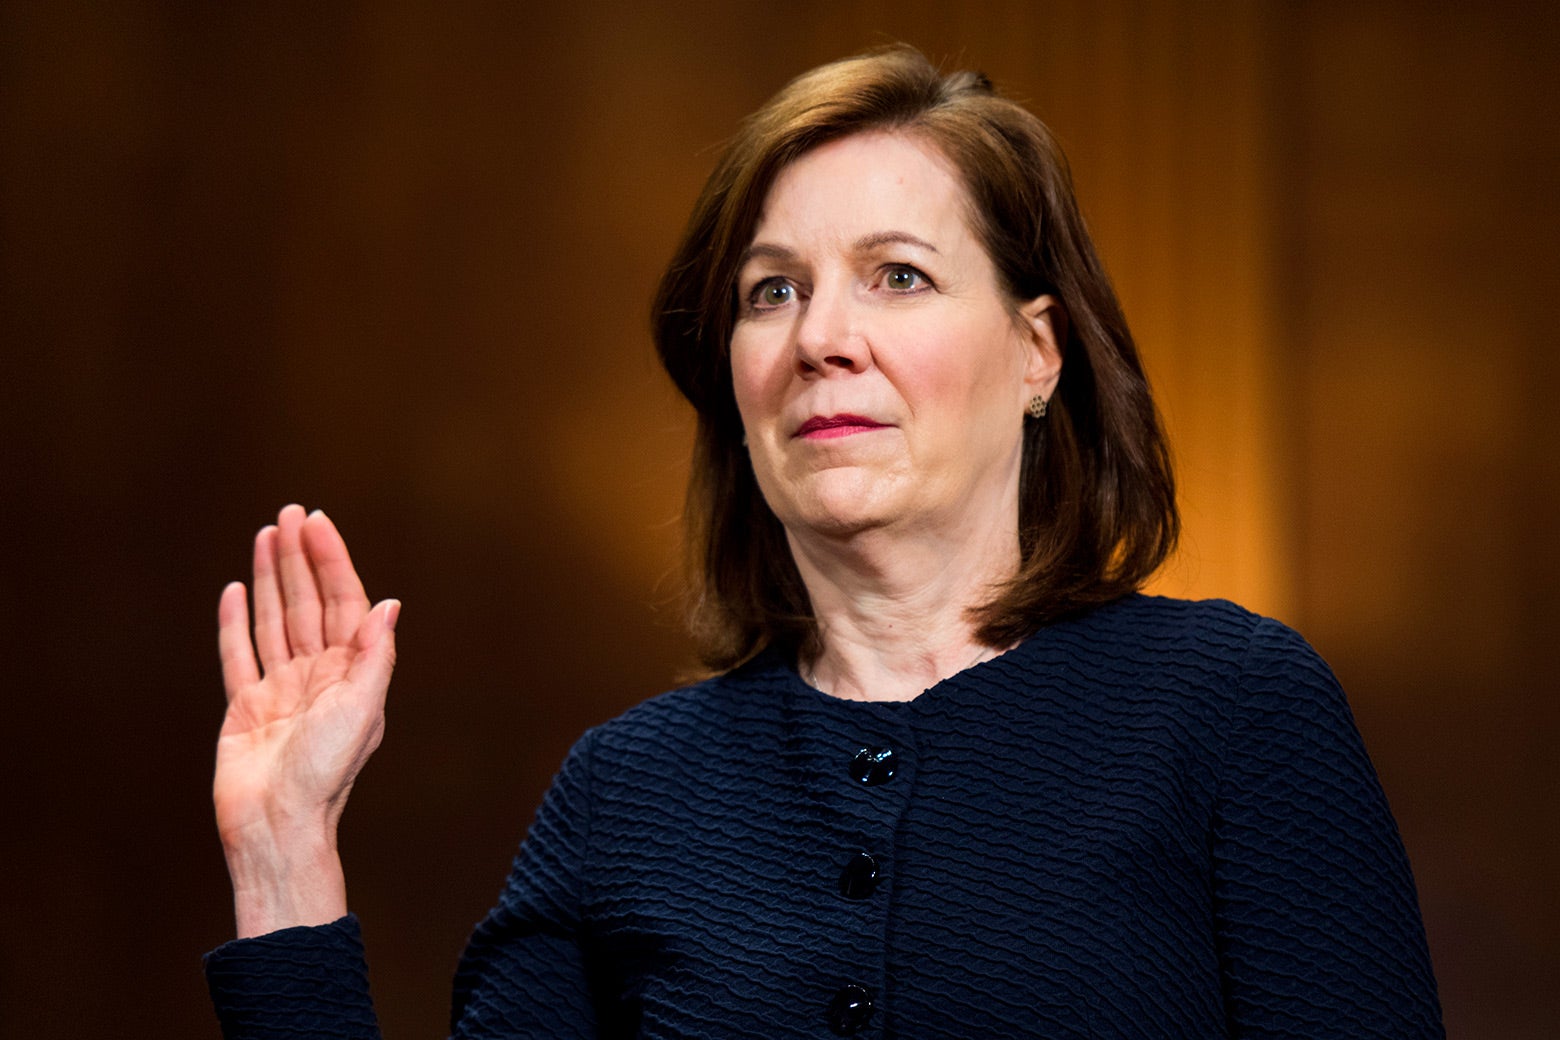 Wendy Vitter is sworn in during her confirmation hearing in the Senate Judiciary Committee to be United States District Judge for the Eastern District of Louisiana on April 11.